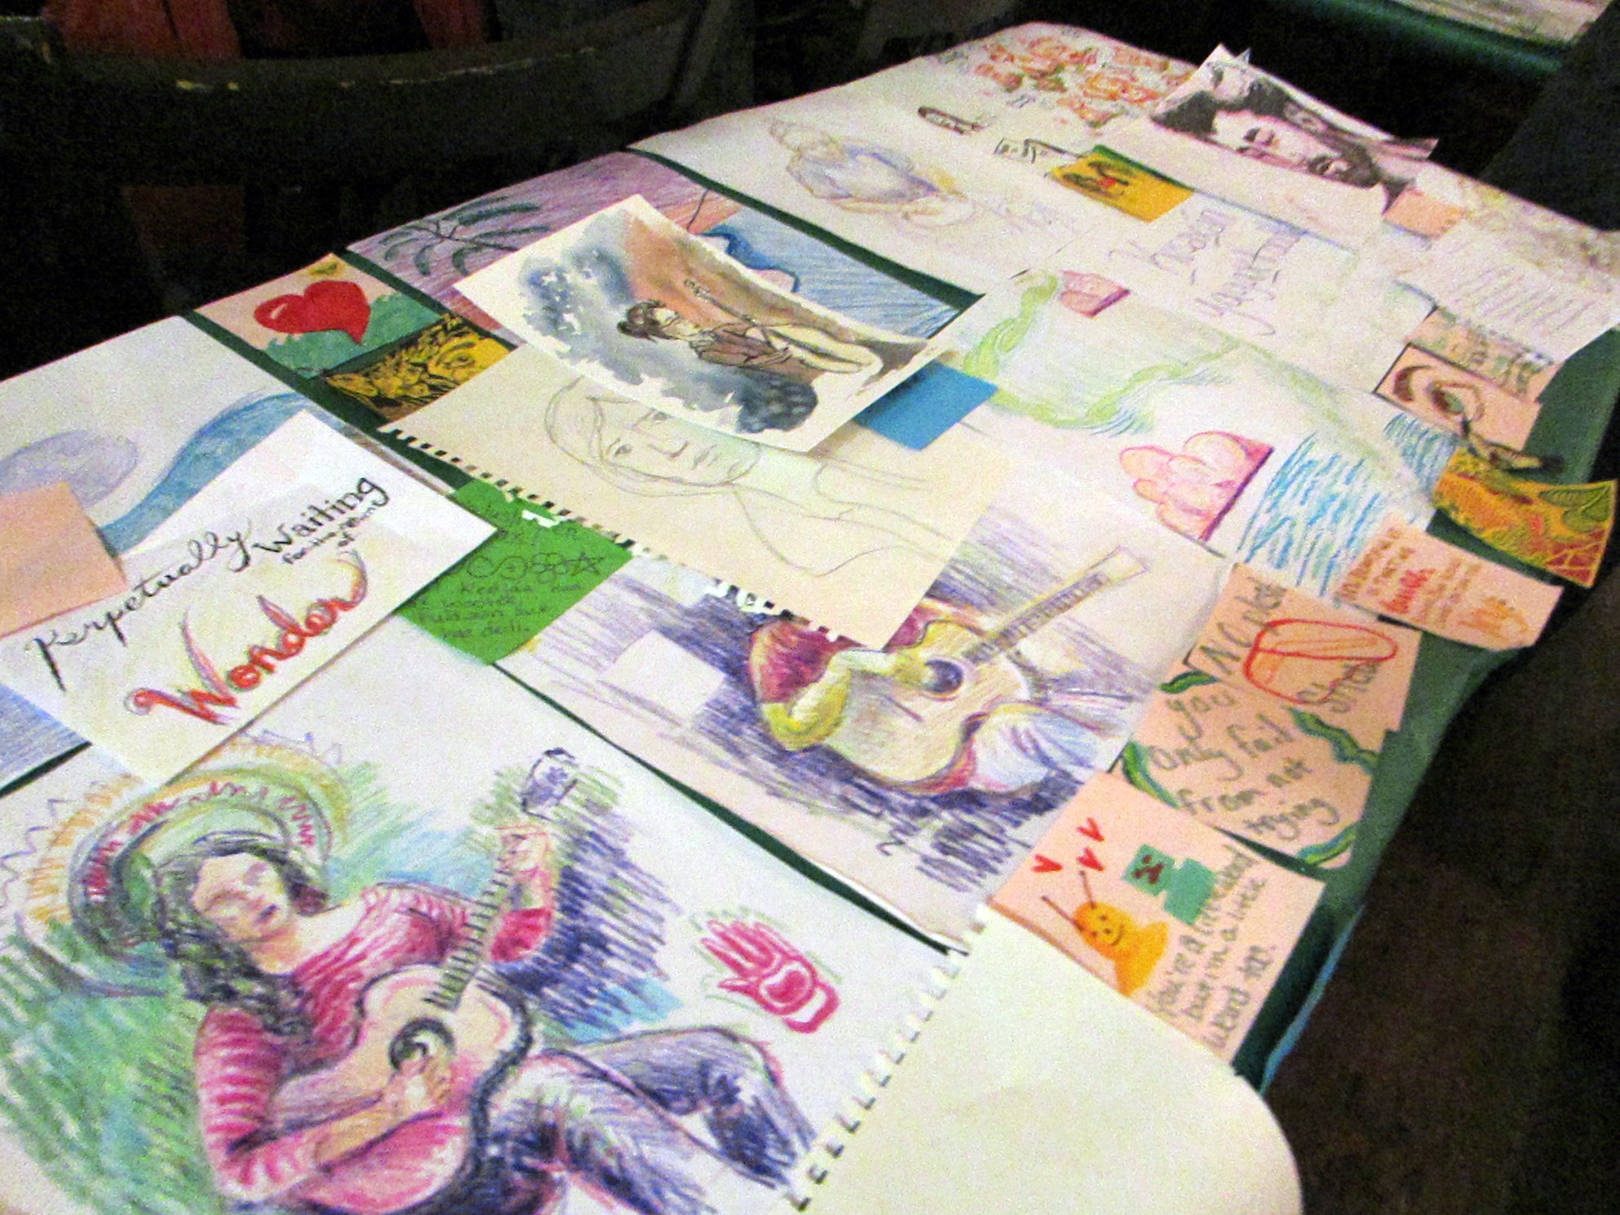 Folding tables were covered in art made during past Mountainside Open Mics during the final show of the season, Thursday, Dec. 13, 2018. (Ben Hohenstatt | Capital City Weekly)